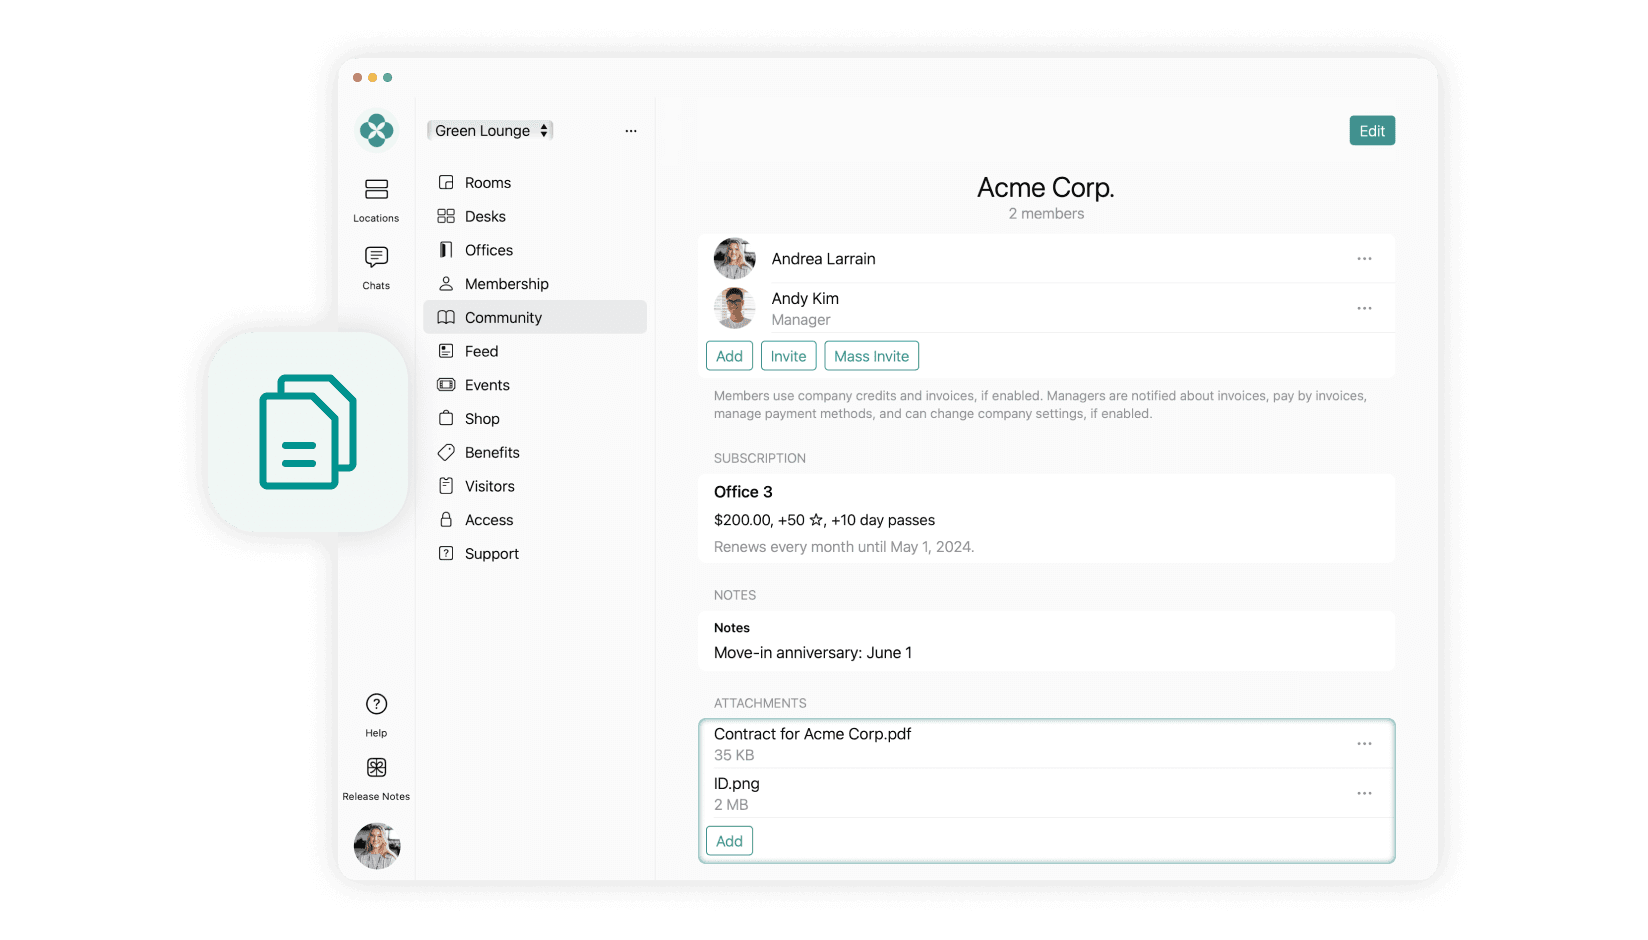 File Attachments for Users & Companies